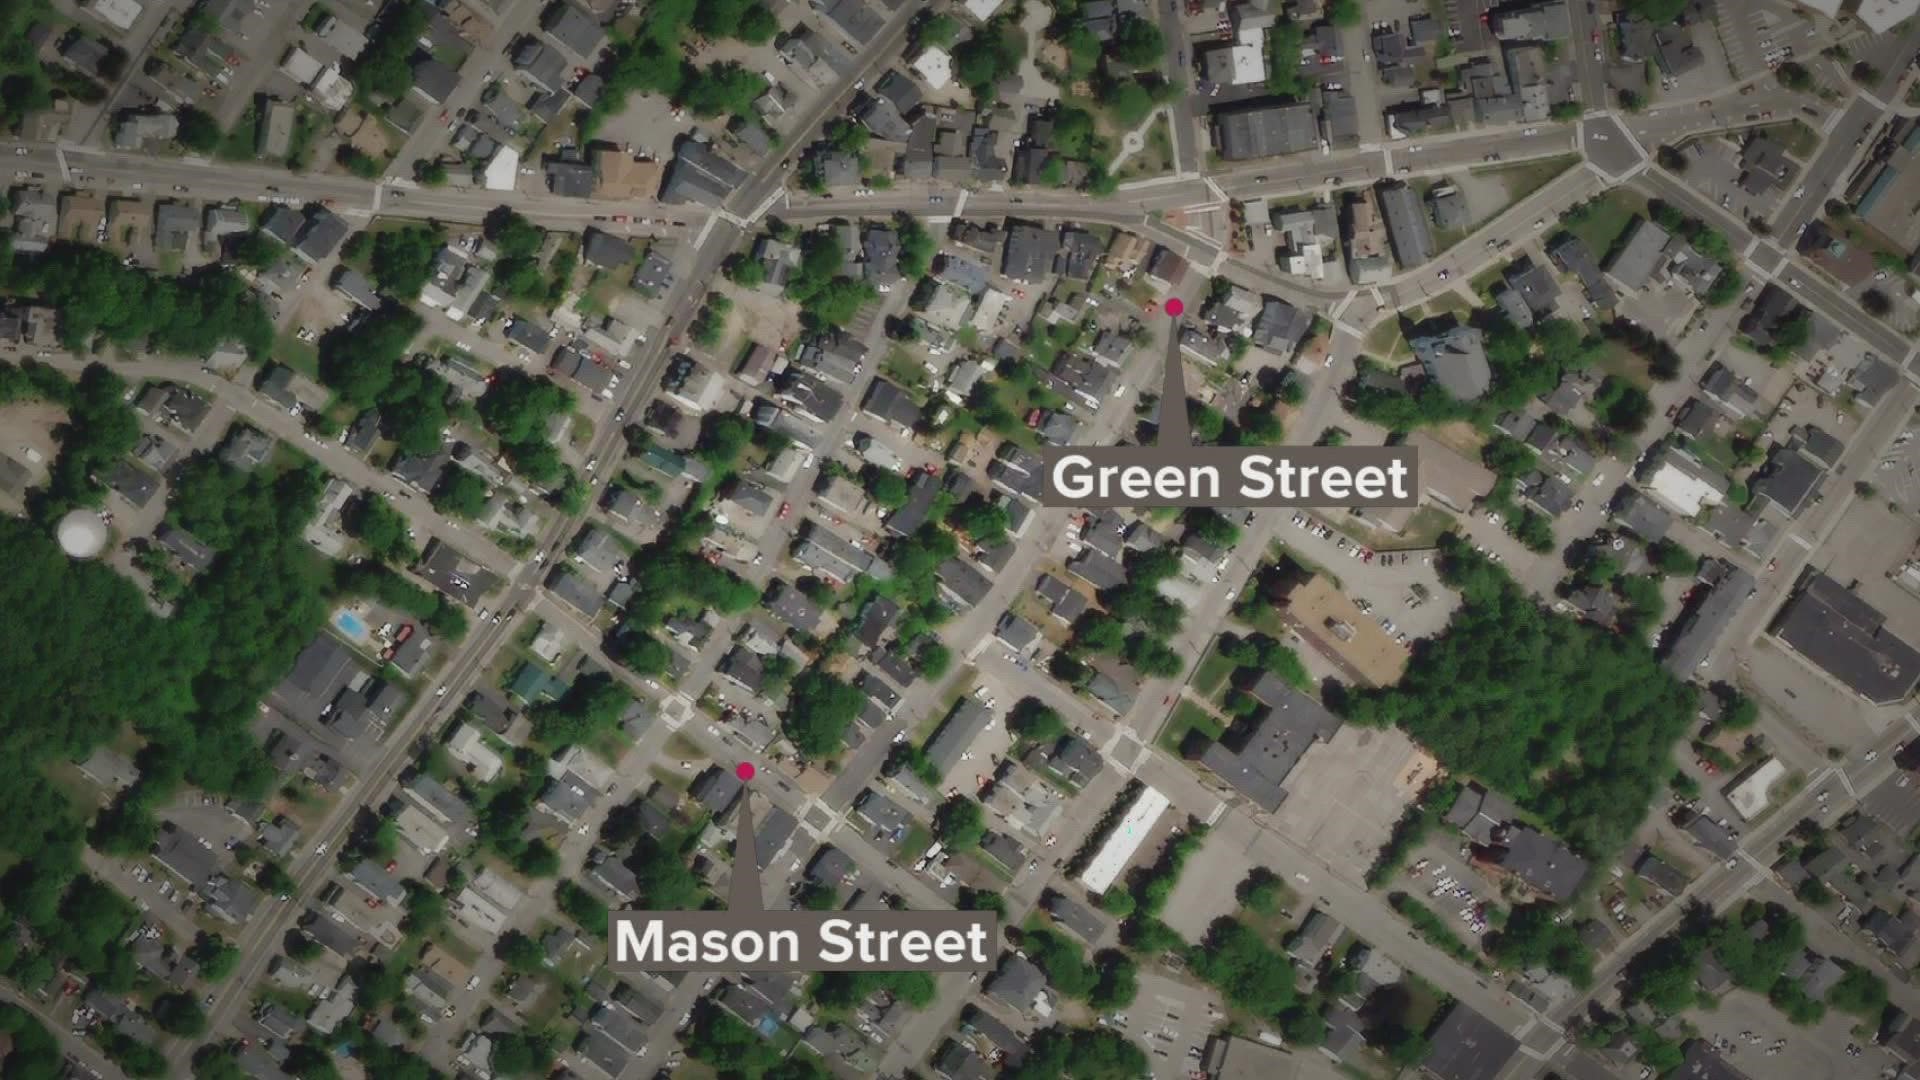 Around 9:30 Friday night several people called 9-1-1 reporting shots fired in the area of Green and Mason Street